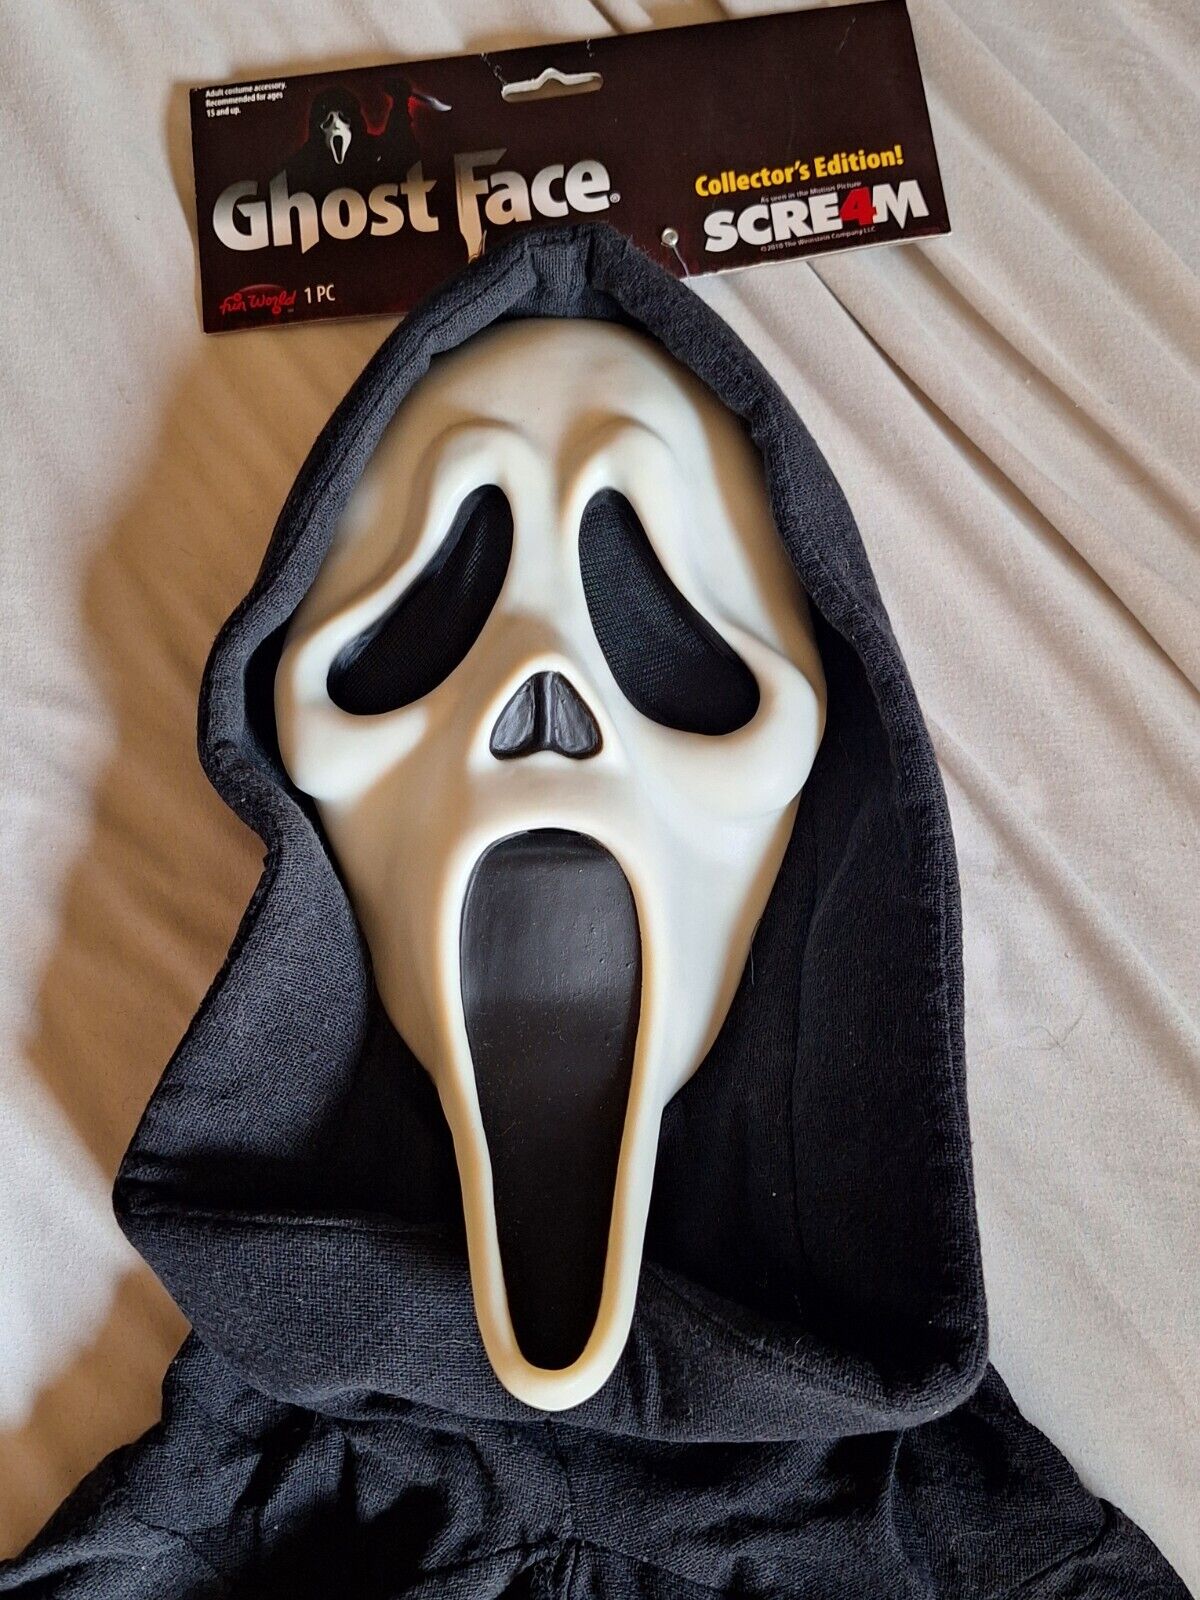 Scream 4 HHN Halloween Horror Nights Collector\'s Edition CE Ghost Face Mask